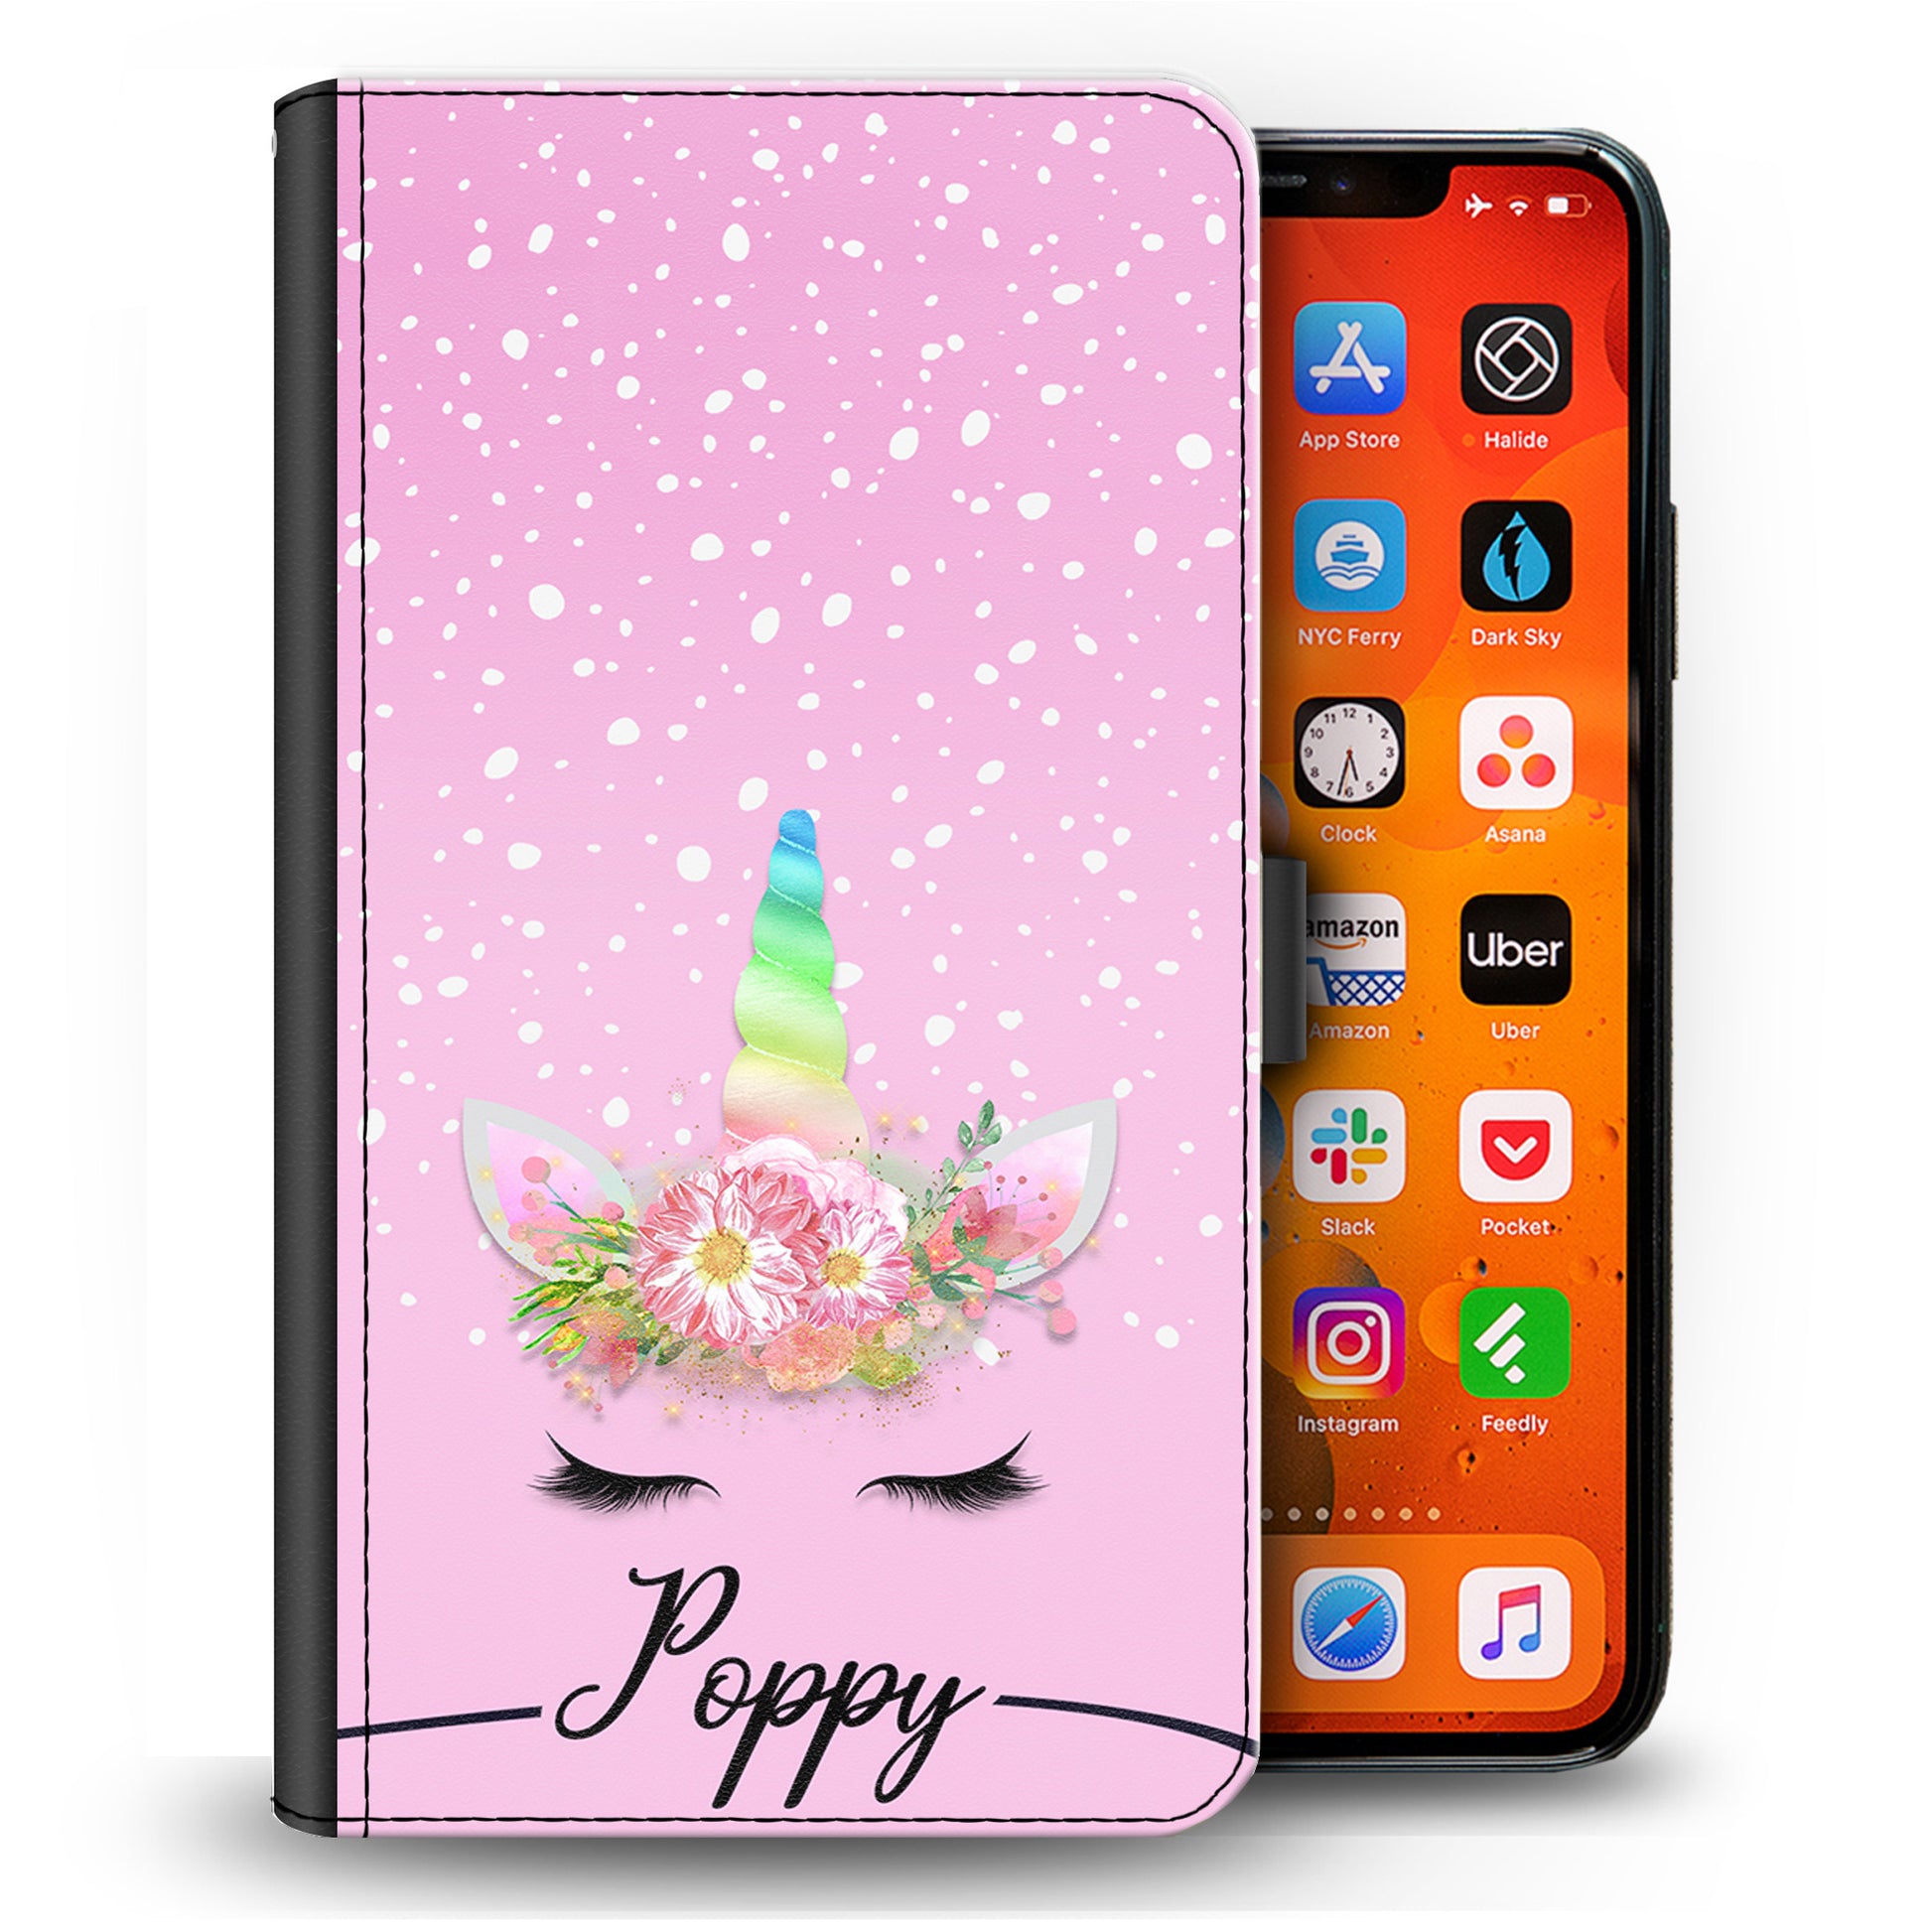 Personalised Nokia Phone Leather Wallet with Rainbow Floral Unicorn and Text on Pink